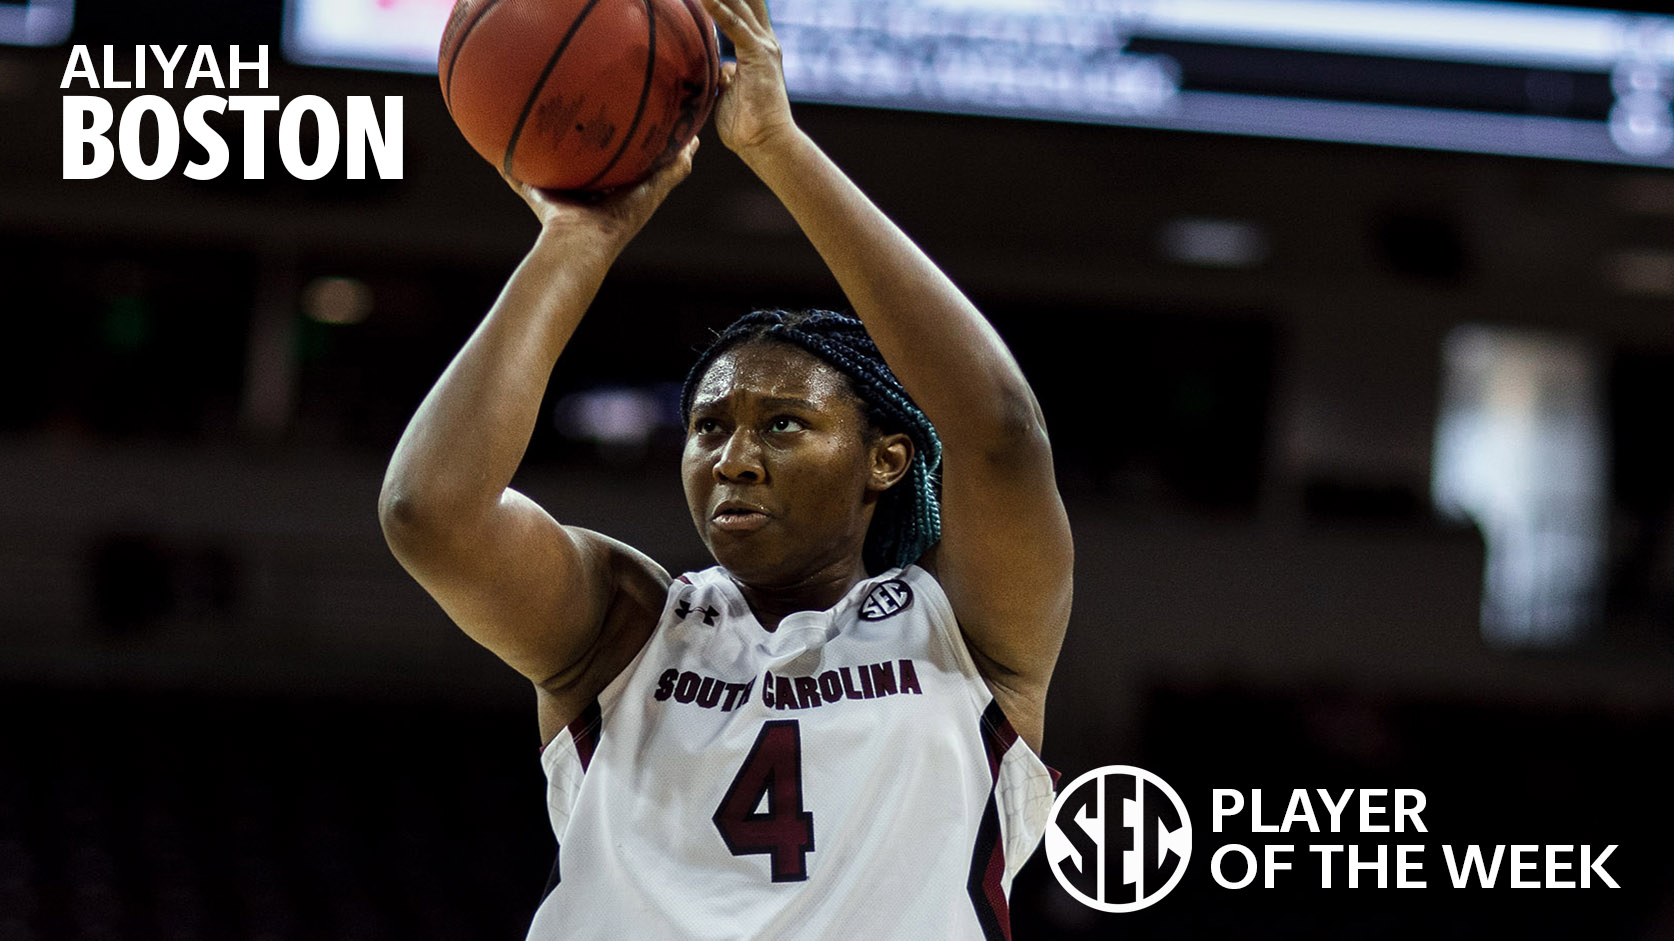 Boston Named SEC Co-Player of the Week